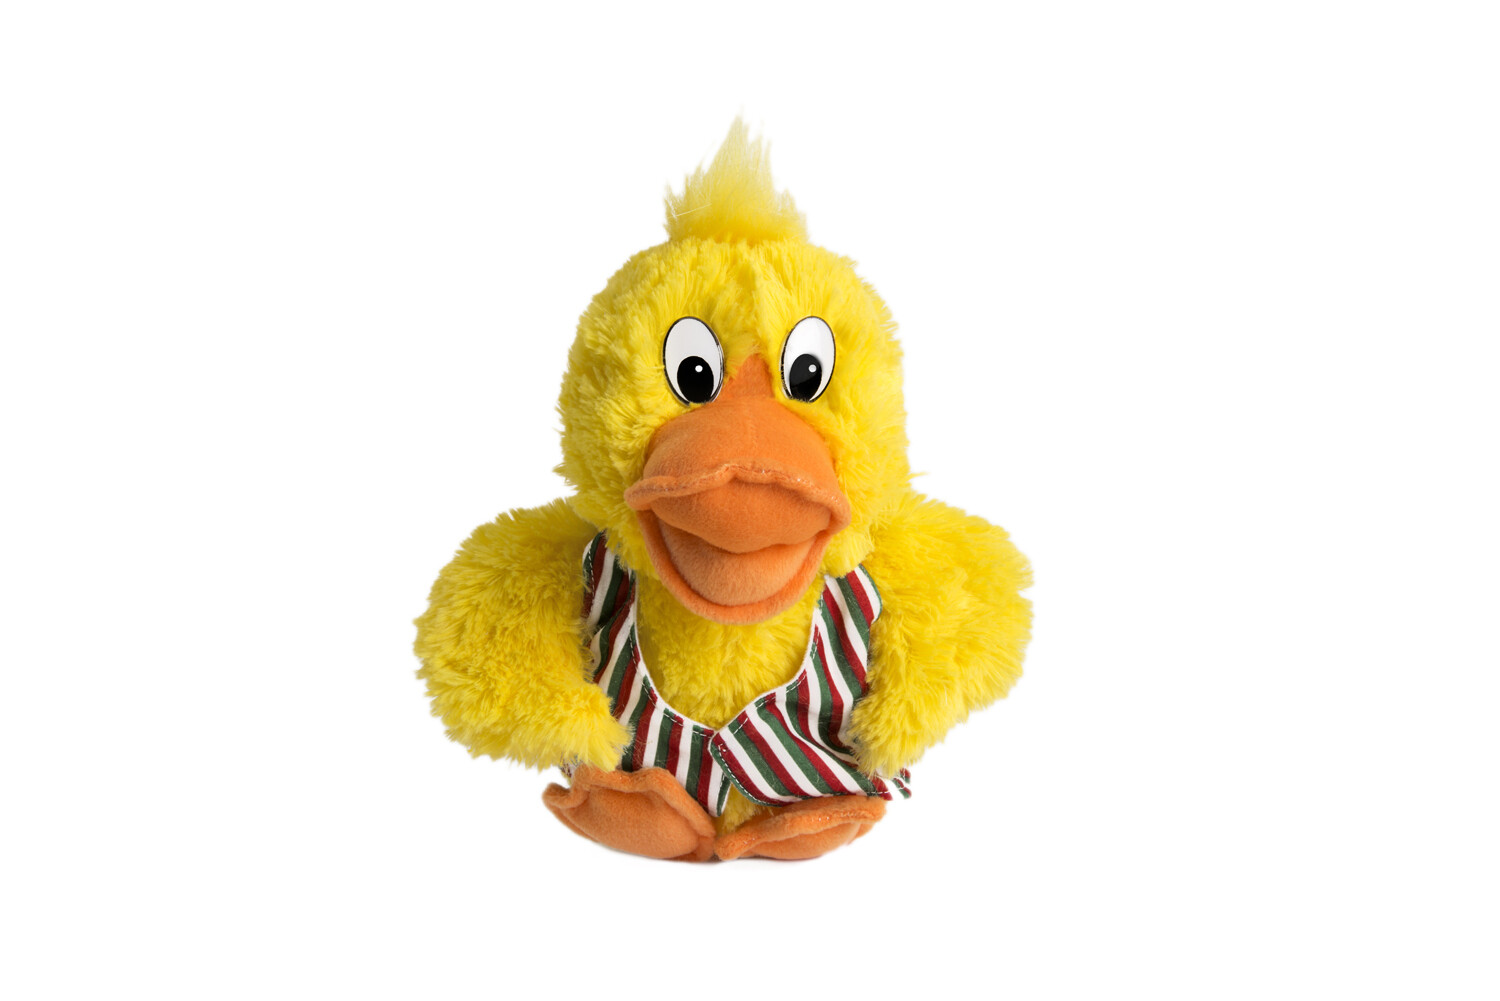 BLACK FRIDAY SALE! Disco Duck 10" Soft Toy. FREE DISCO DUCK STORY BOOK WITH EVERY SOFT TOY PURCHASED.